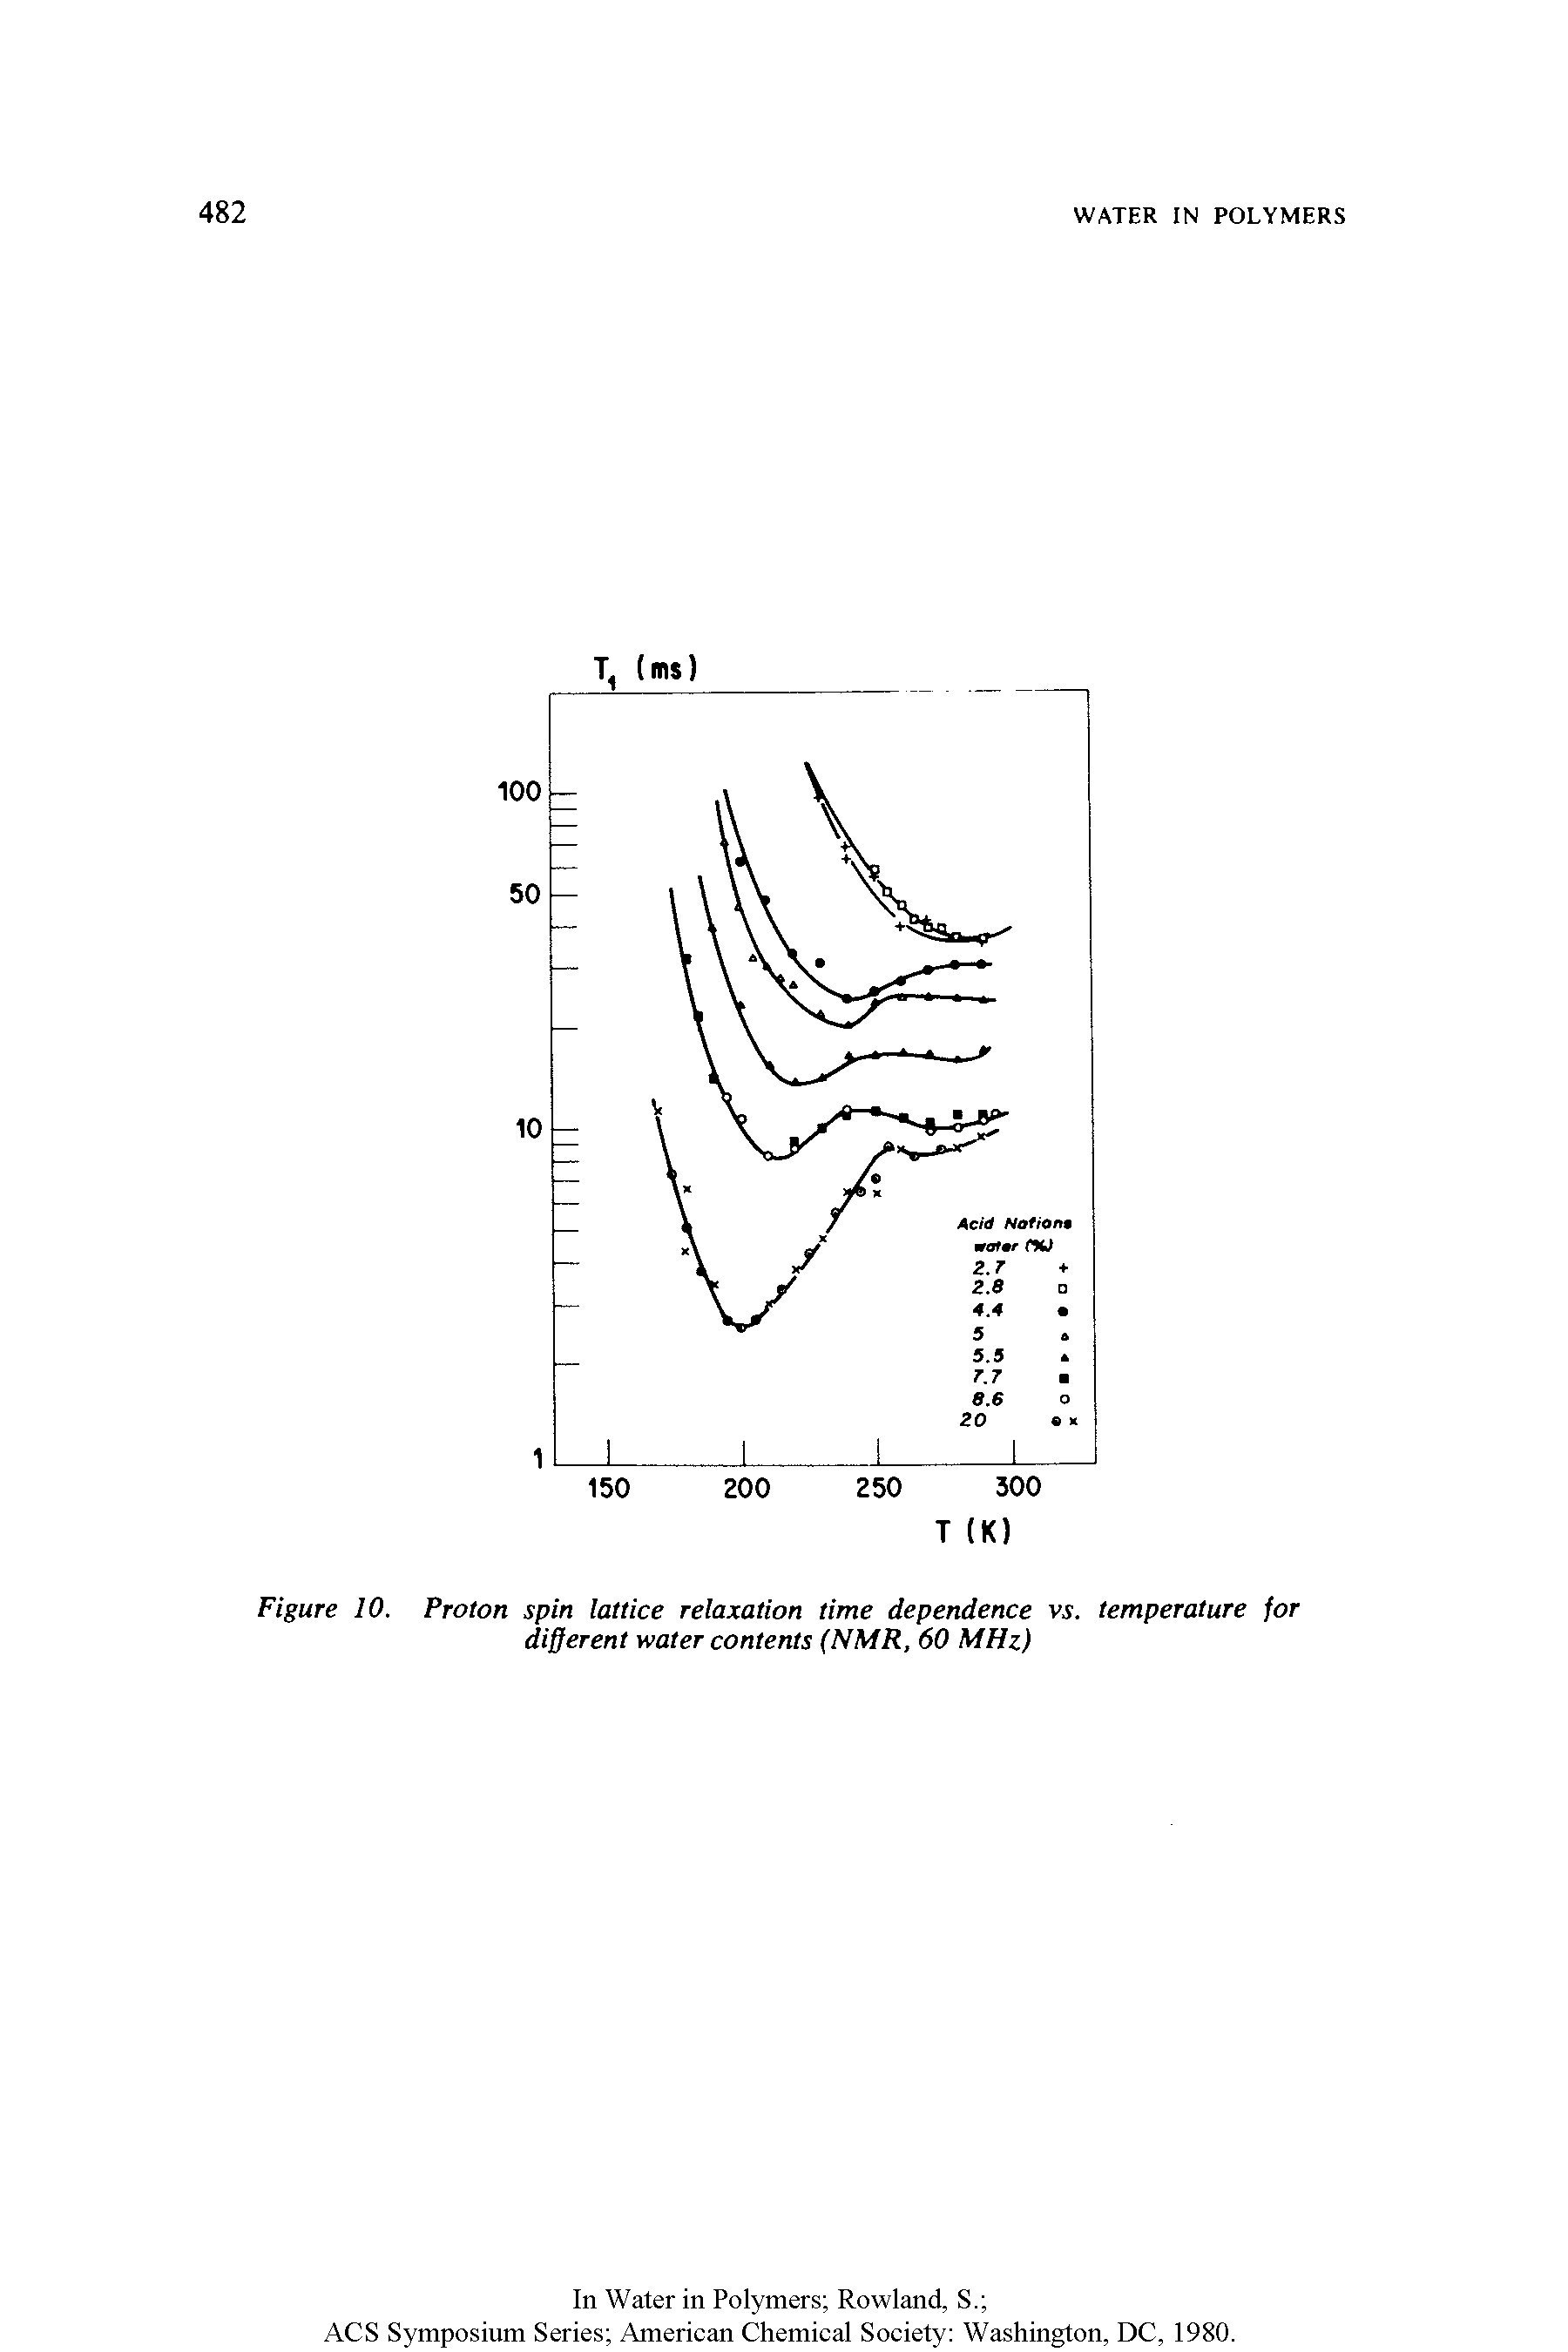 Figure 10. Proton spin lattice relaxation time dependence vs. temperature for different water contents (NMR, 60 MHz)...